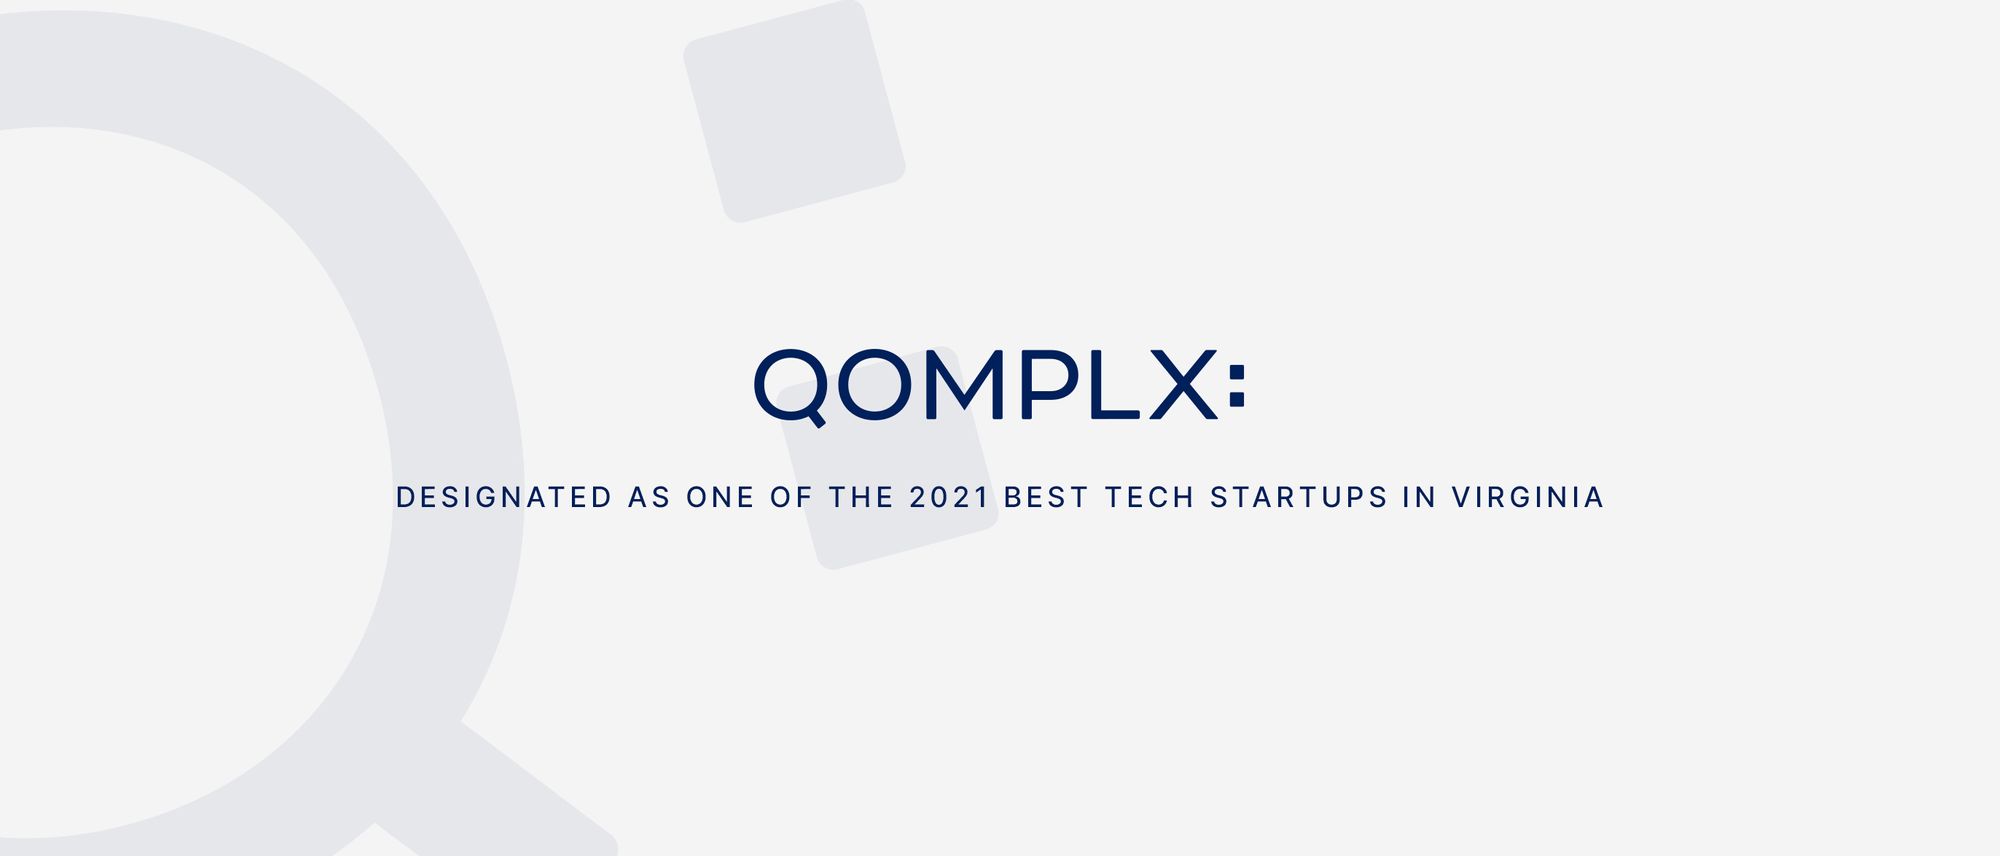 QOMPLX Named One of the 2021 Best Tech Startups in Virginia